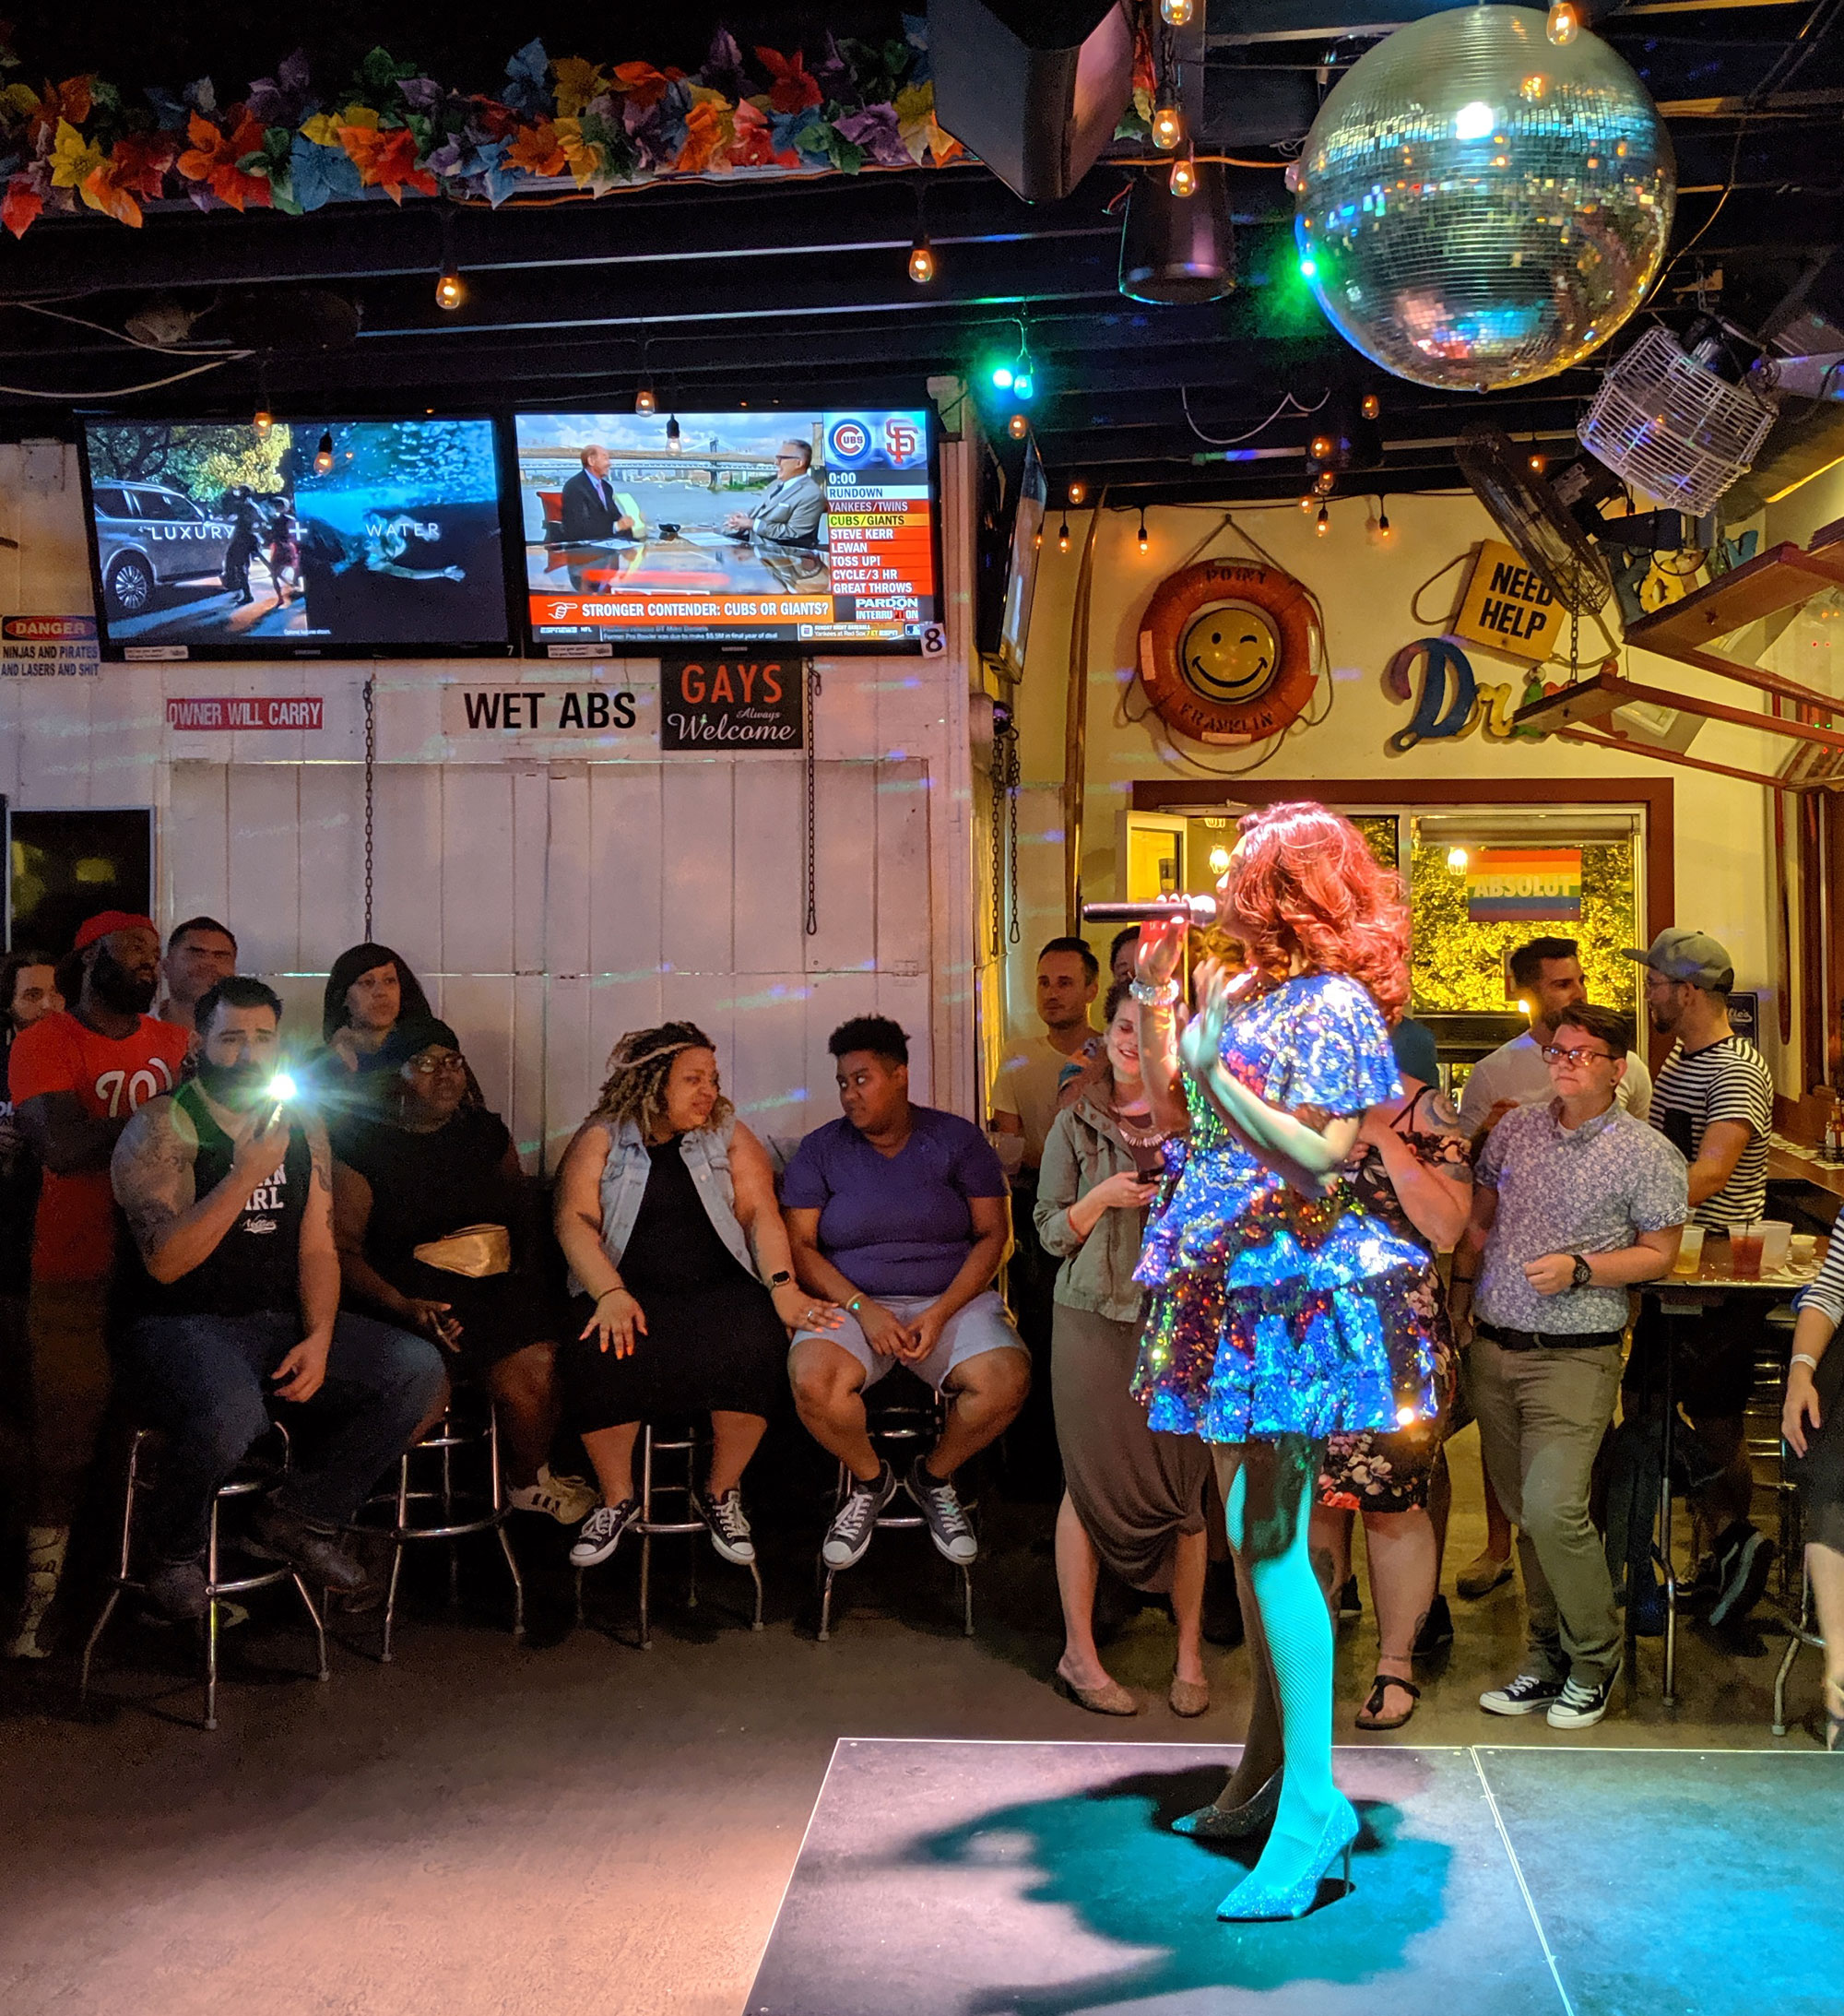 Brooklyn Heights hosting her drag show at Nellie's Sports Bar.